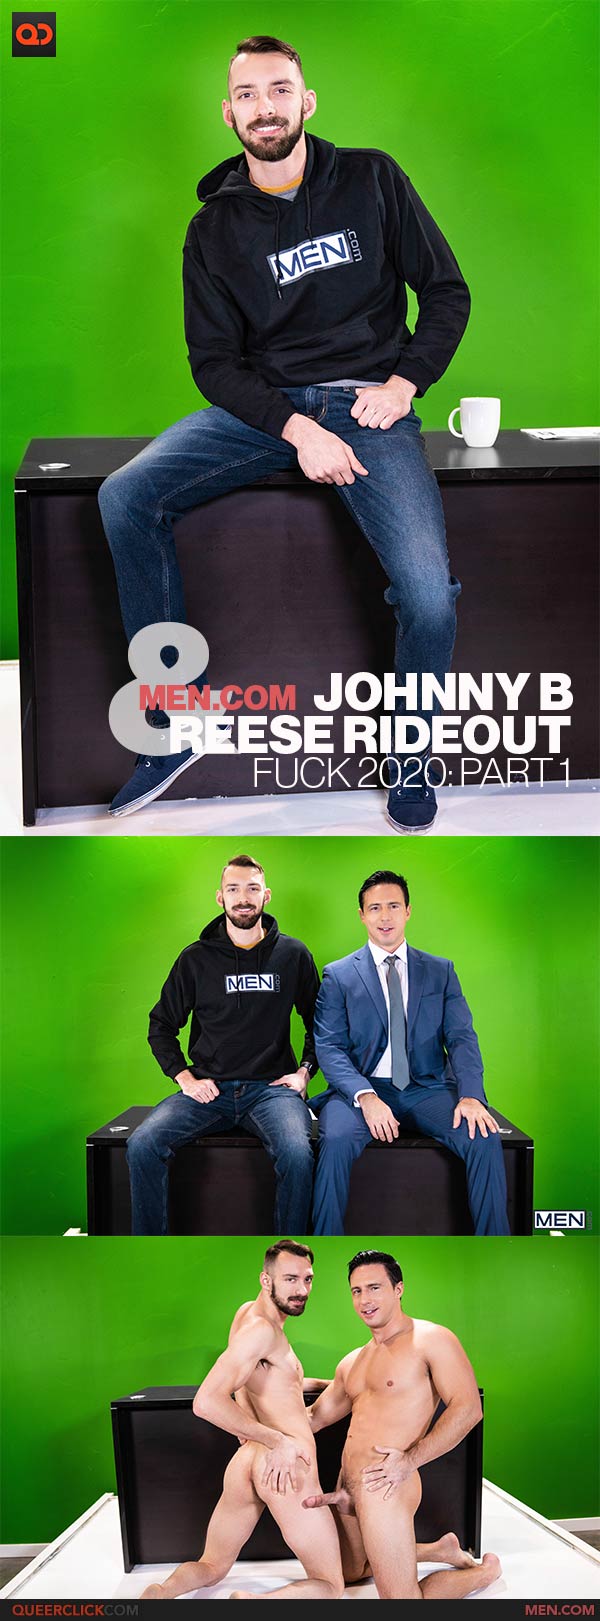 Men.com: Johnny B and Reese Rideout